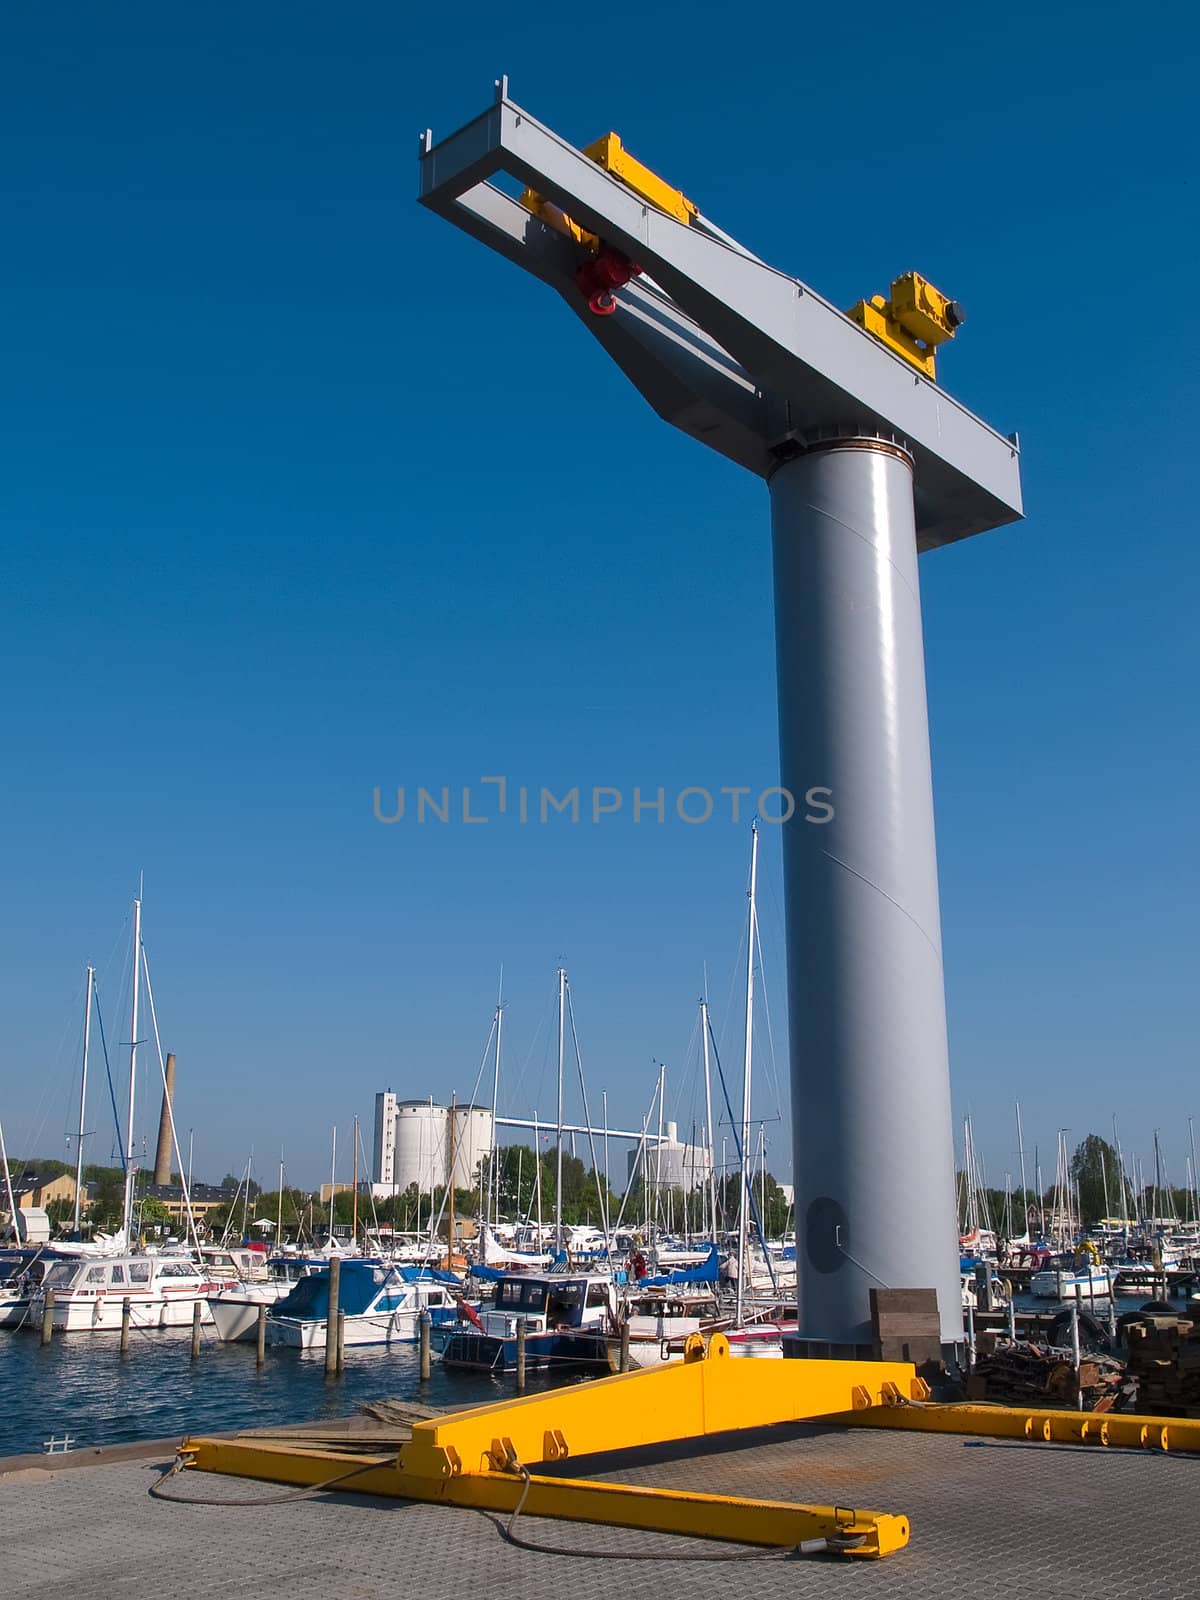 Boat lifter crane by Ronyzmbow